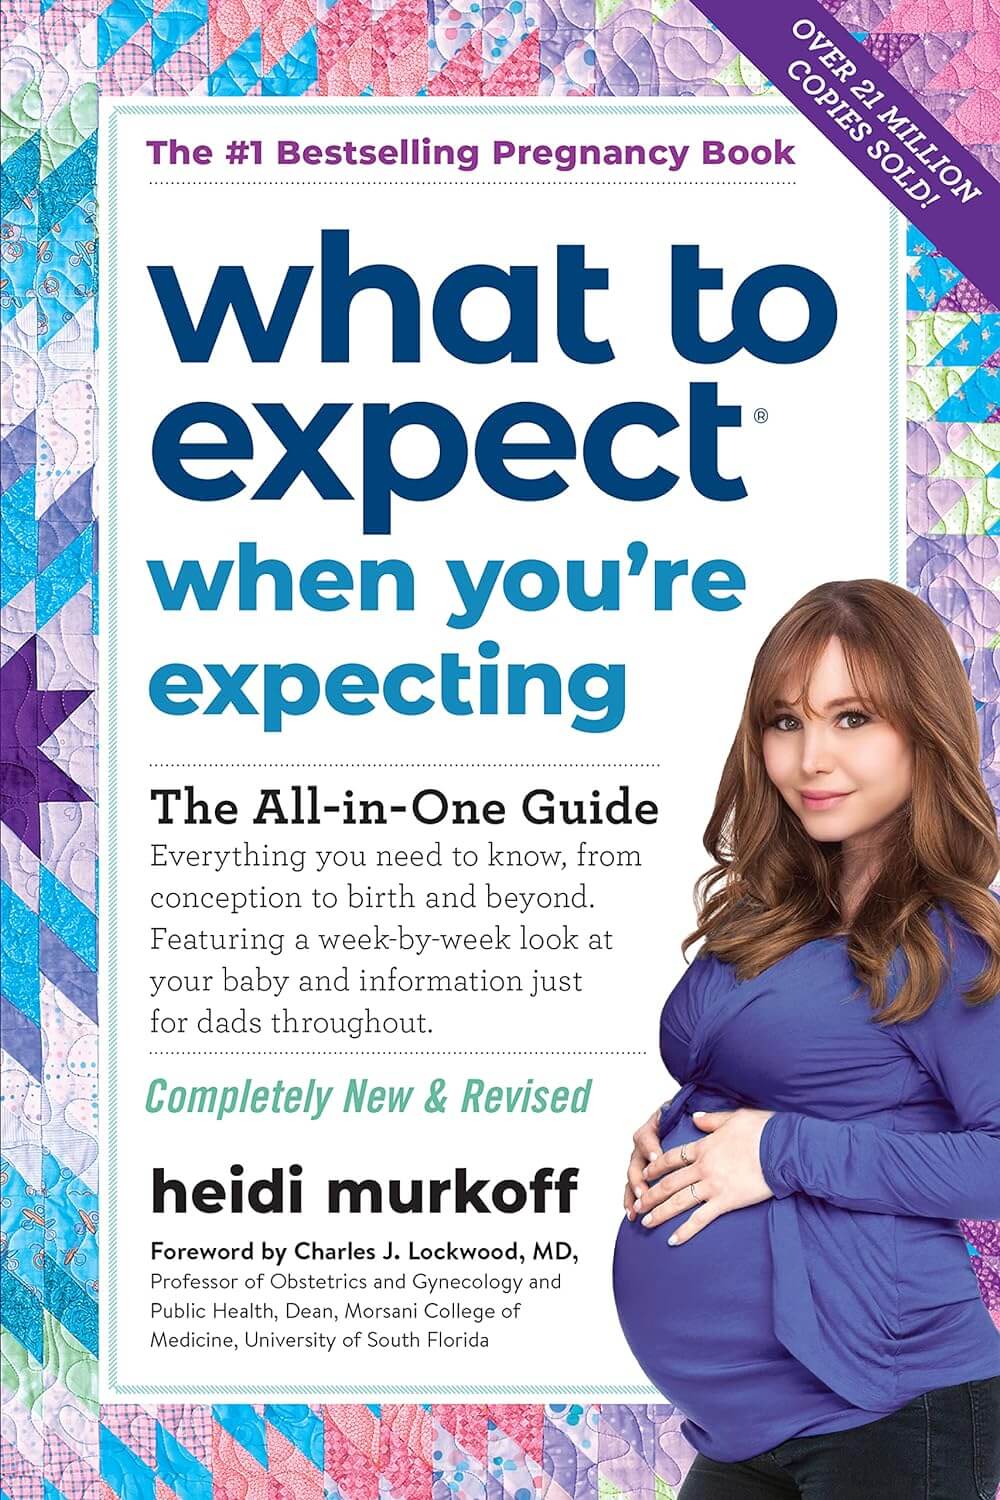 "What to Expect When You're Expecting" by Heidi Murkoff